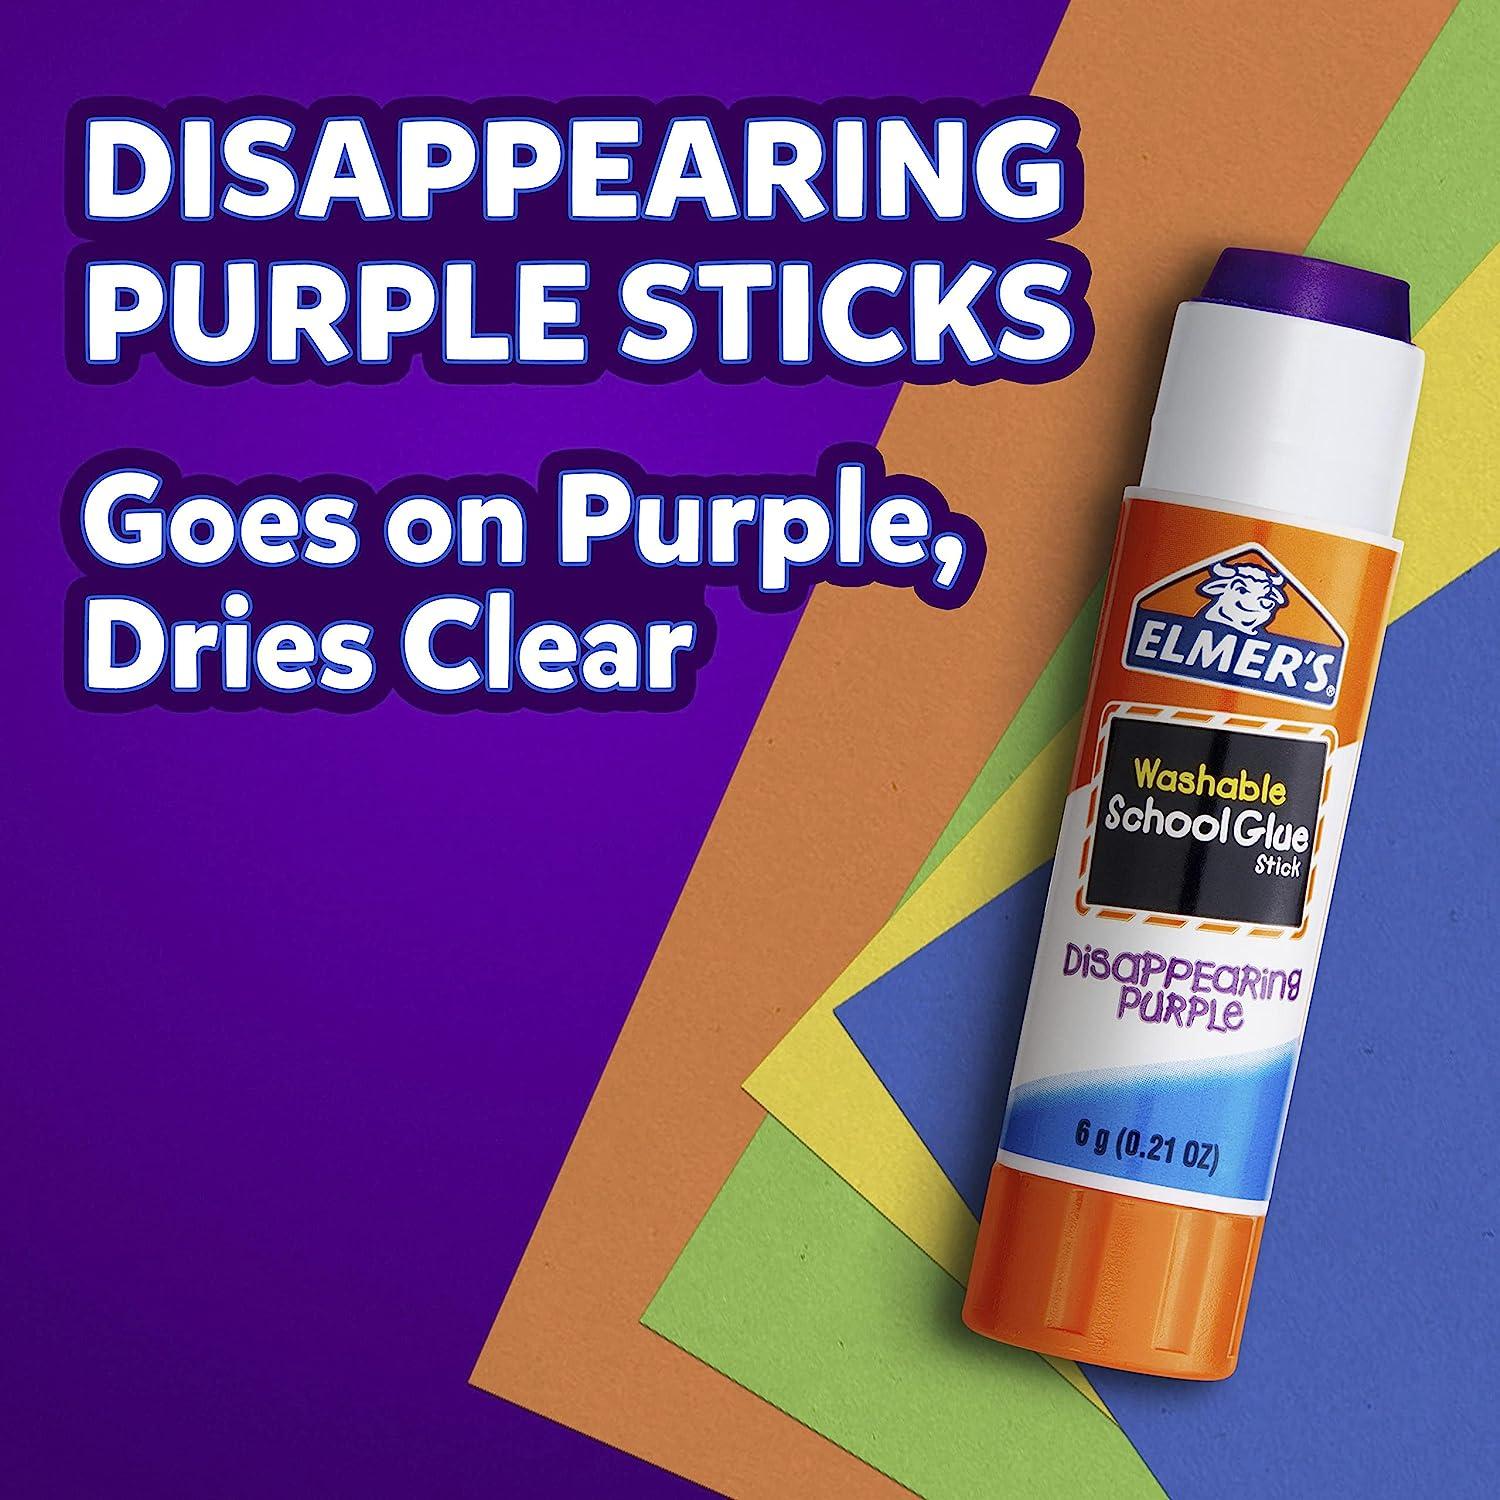 New bottle Elmer's glue goes on purple, dries clear - business